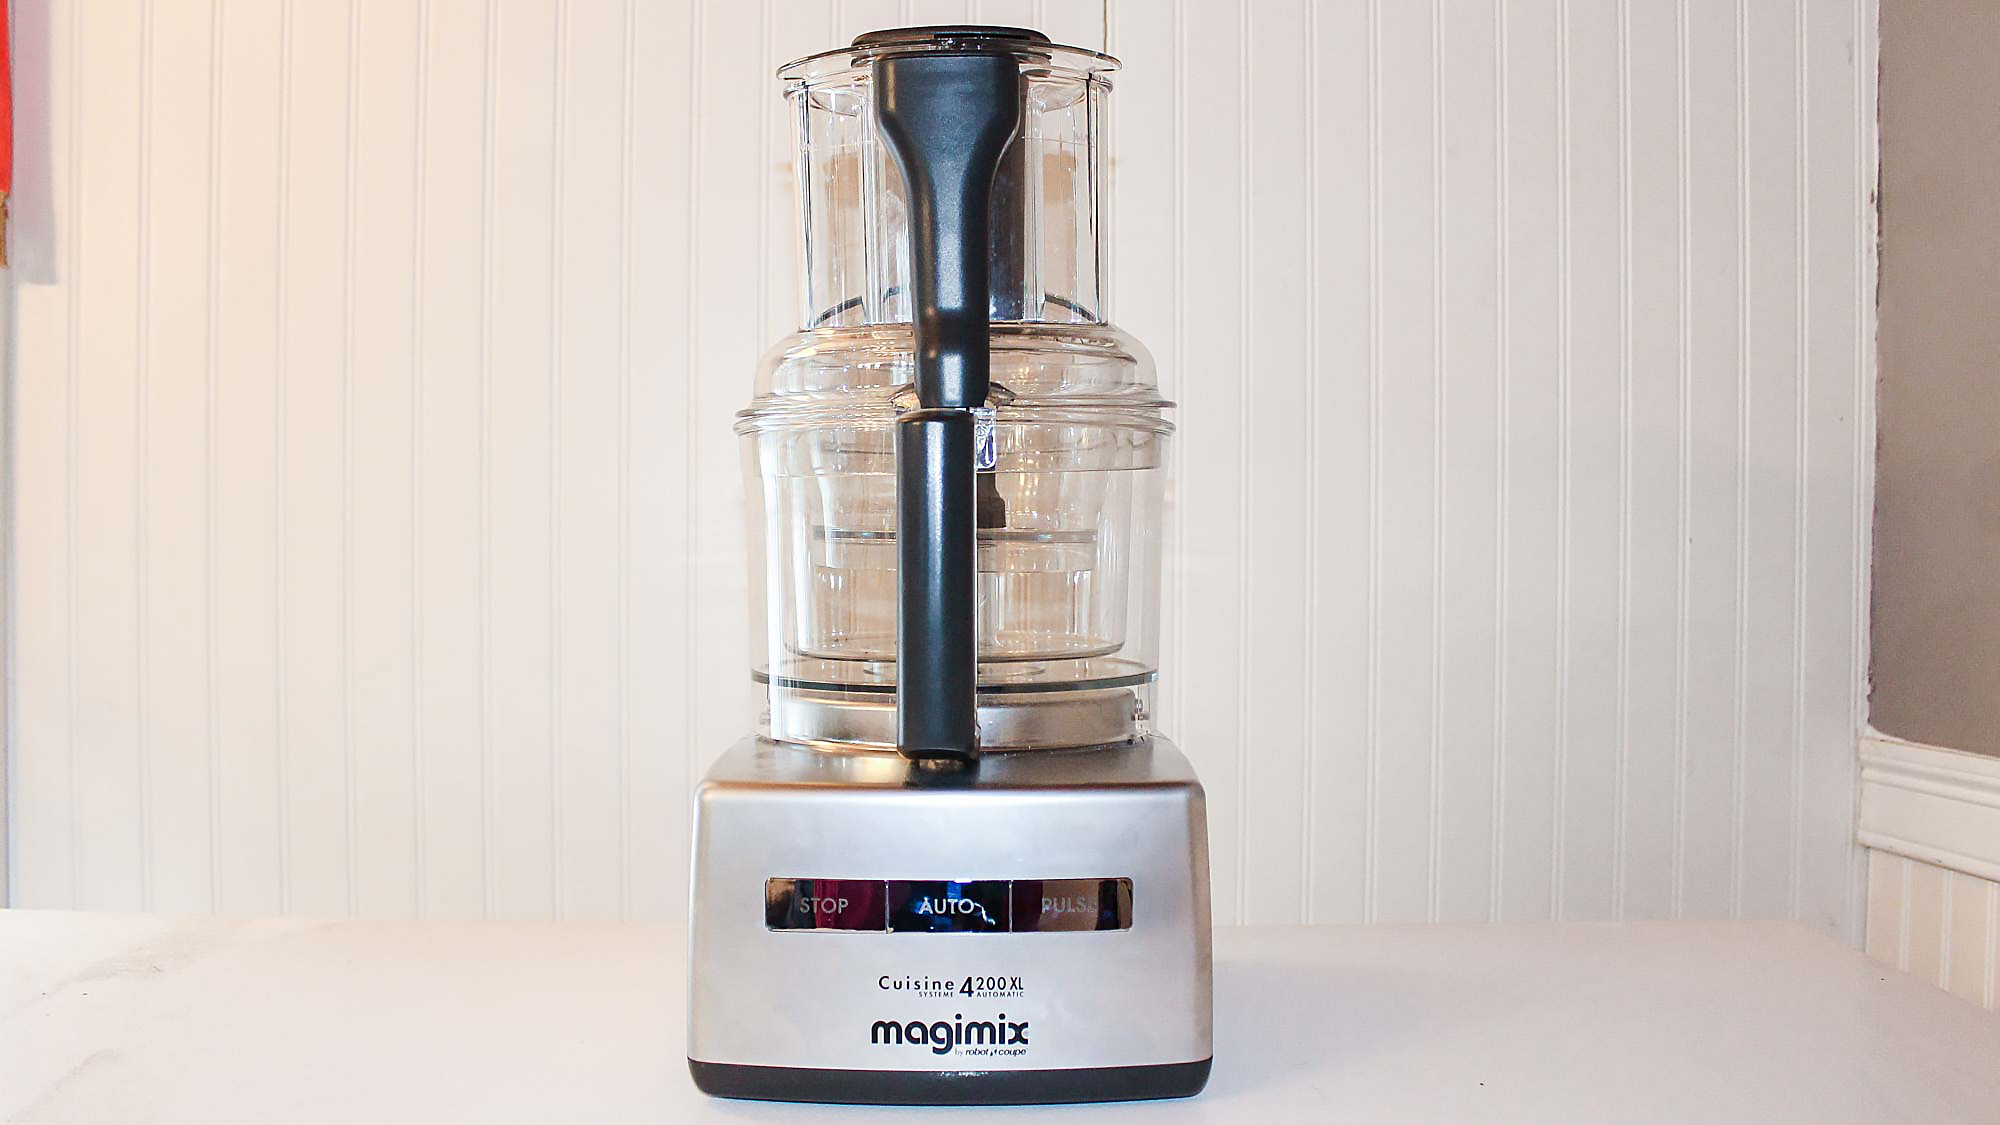 Magimix Food Processor 14 Cup on counter